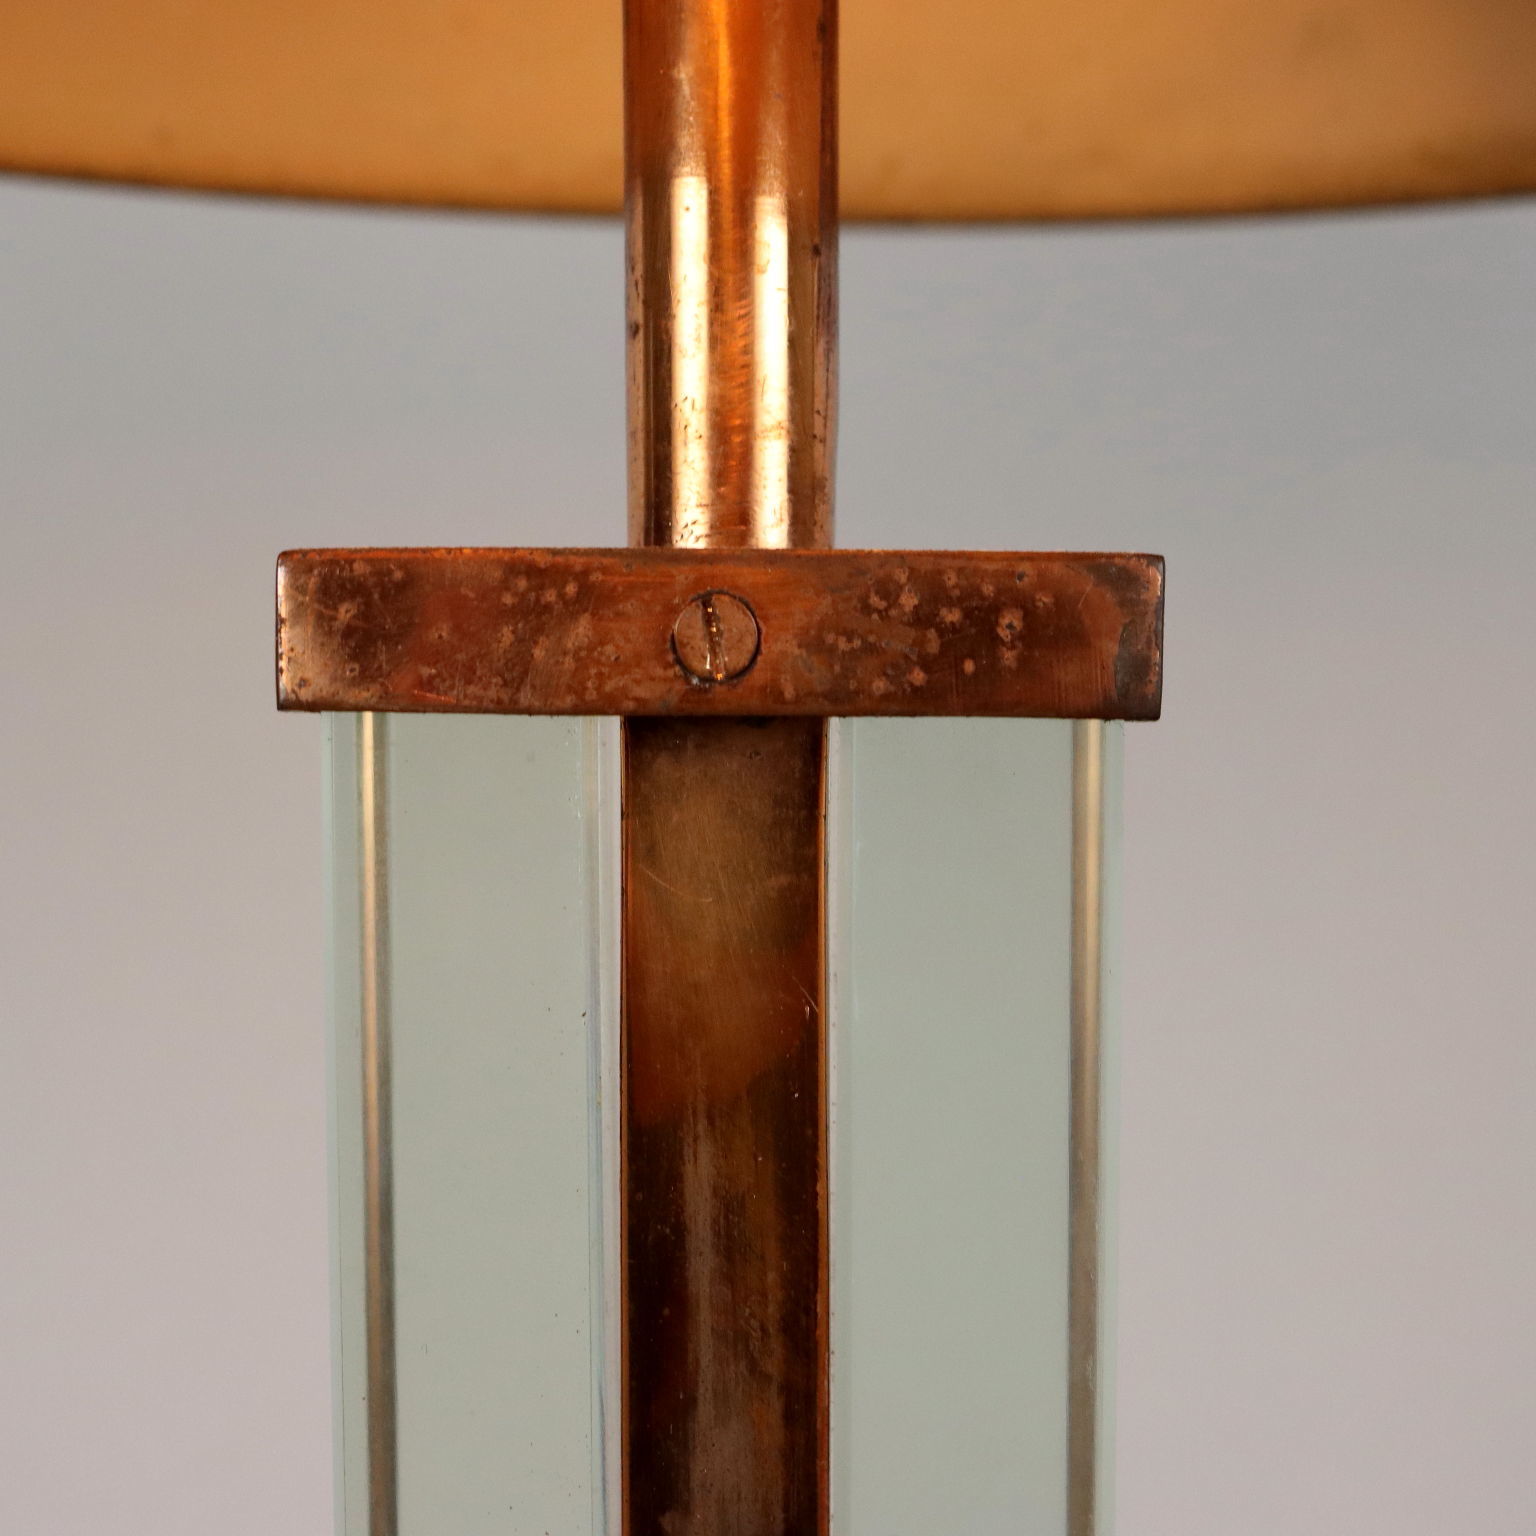 Vintage 50s-60s Table Lamp Copper Glass Italy